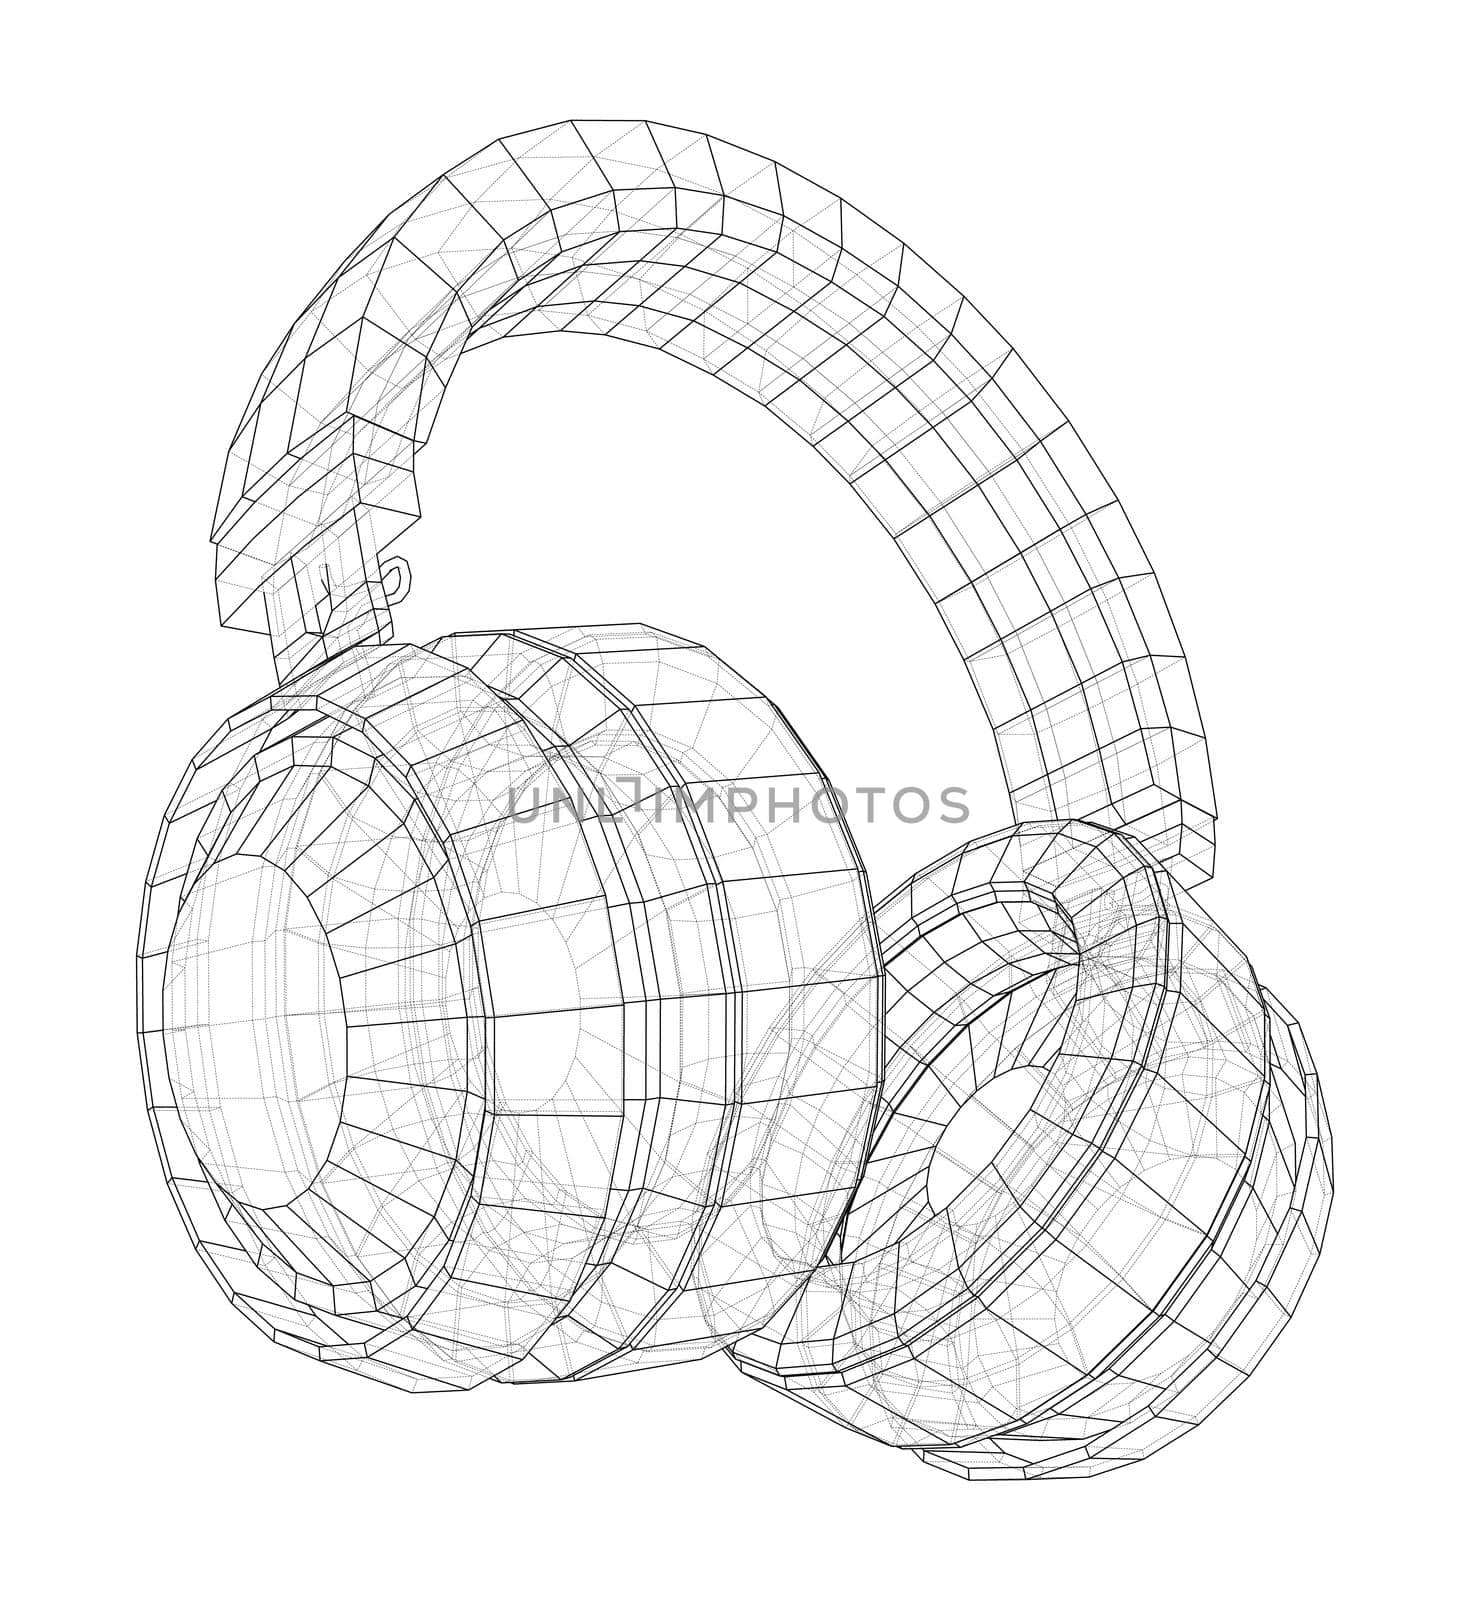 Headphones concept outline by cherezoff